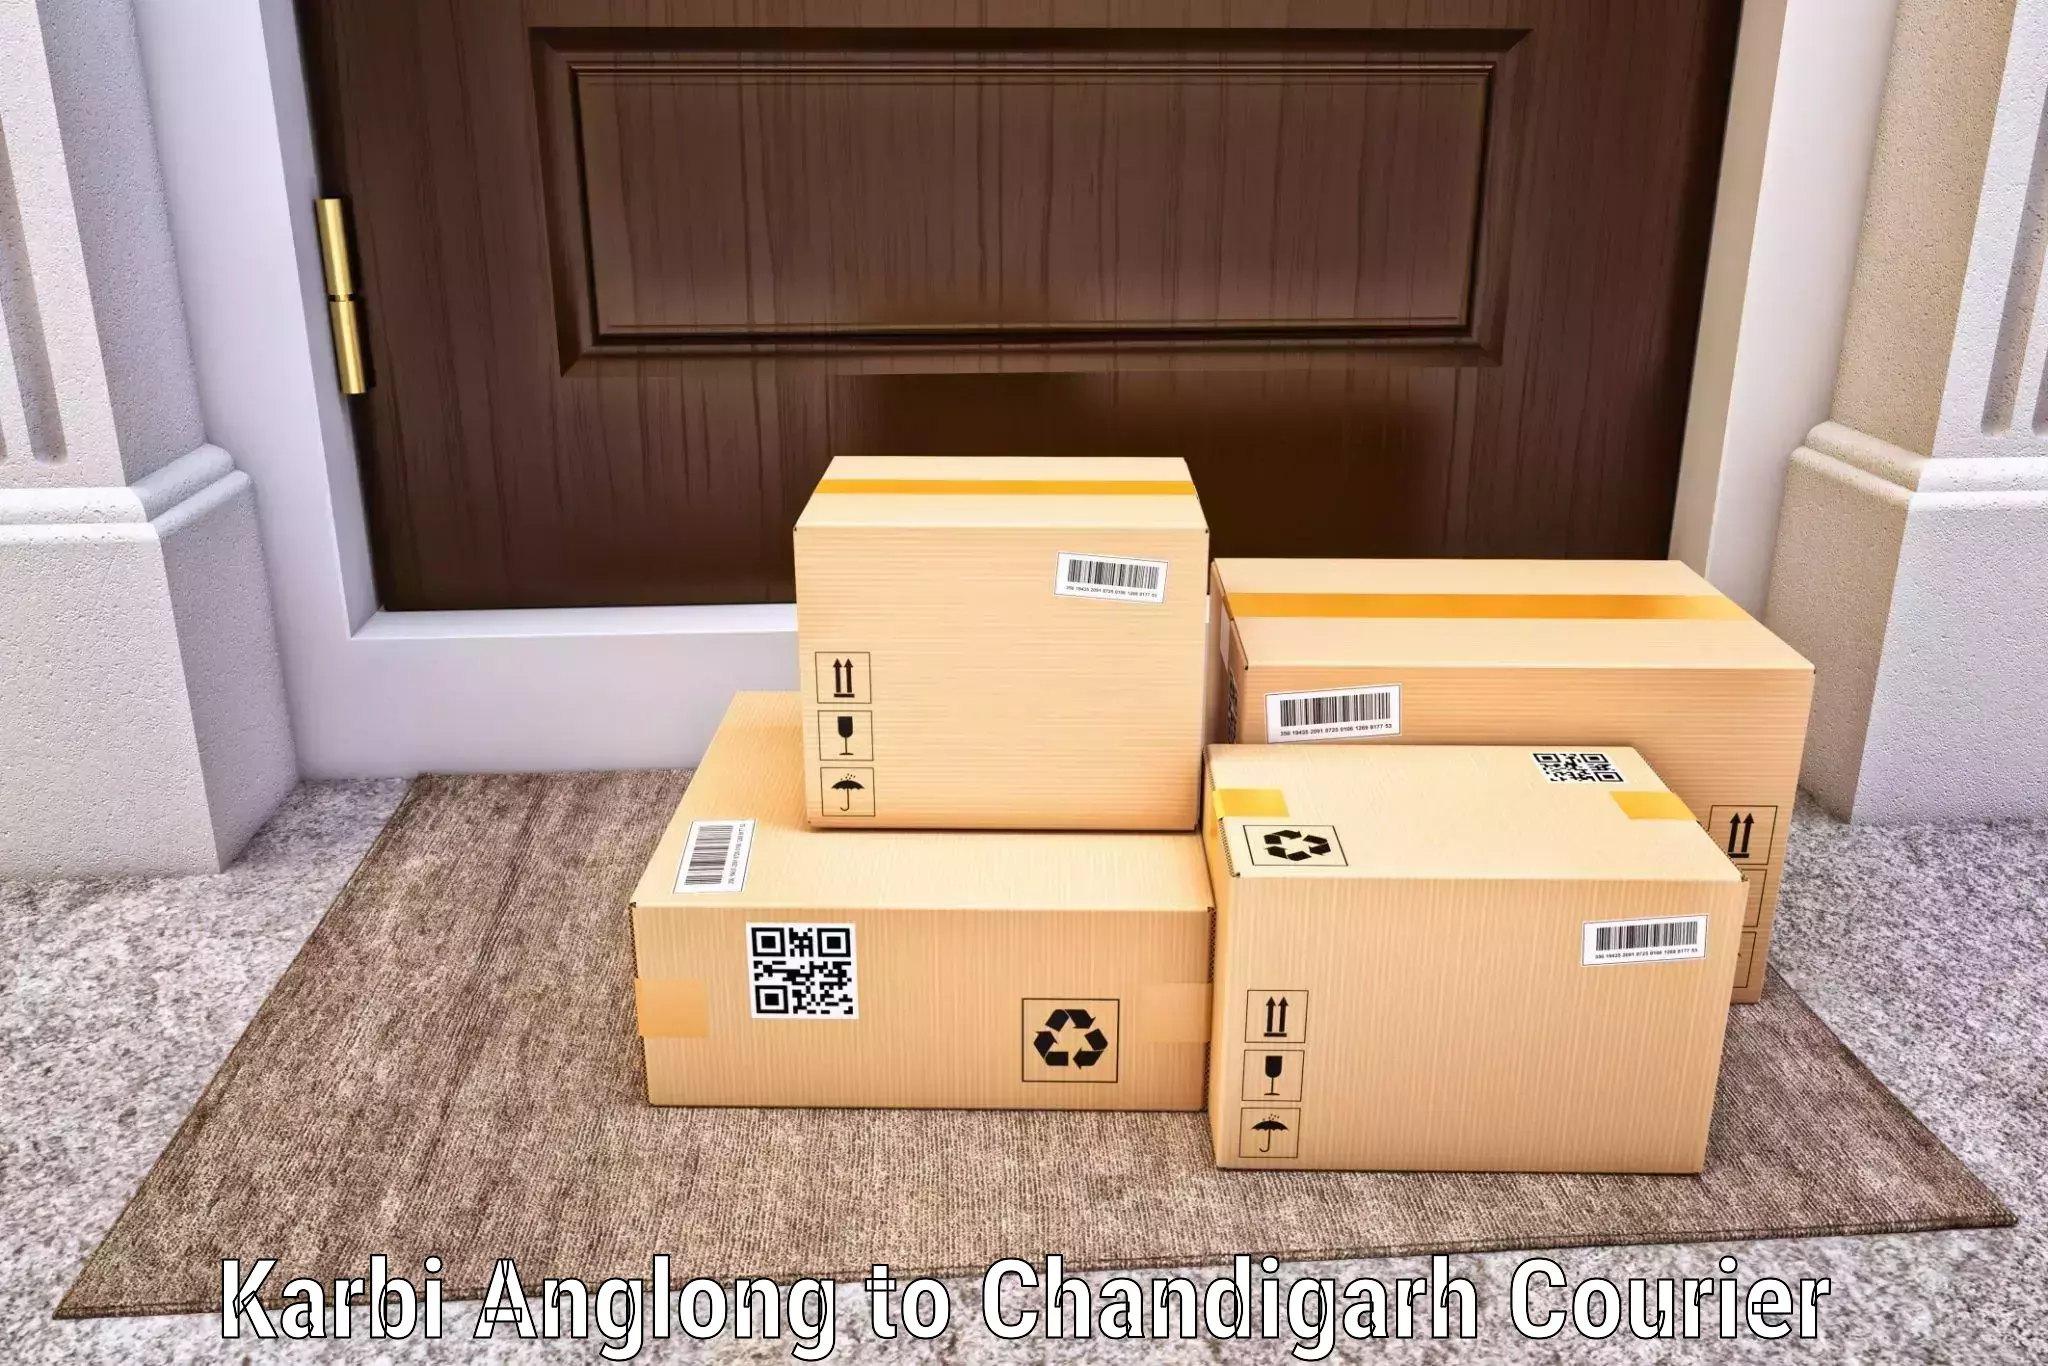 Online shipping calculator Karbi Anglong to Chandigarh